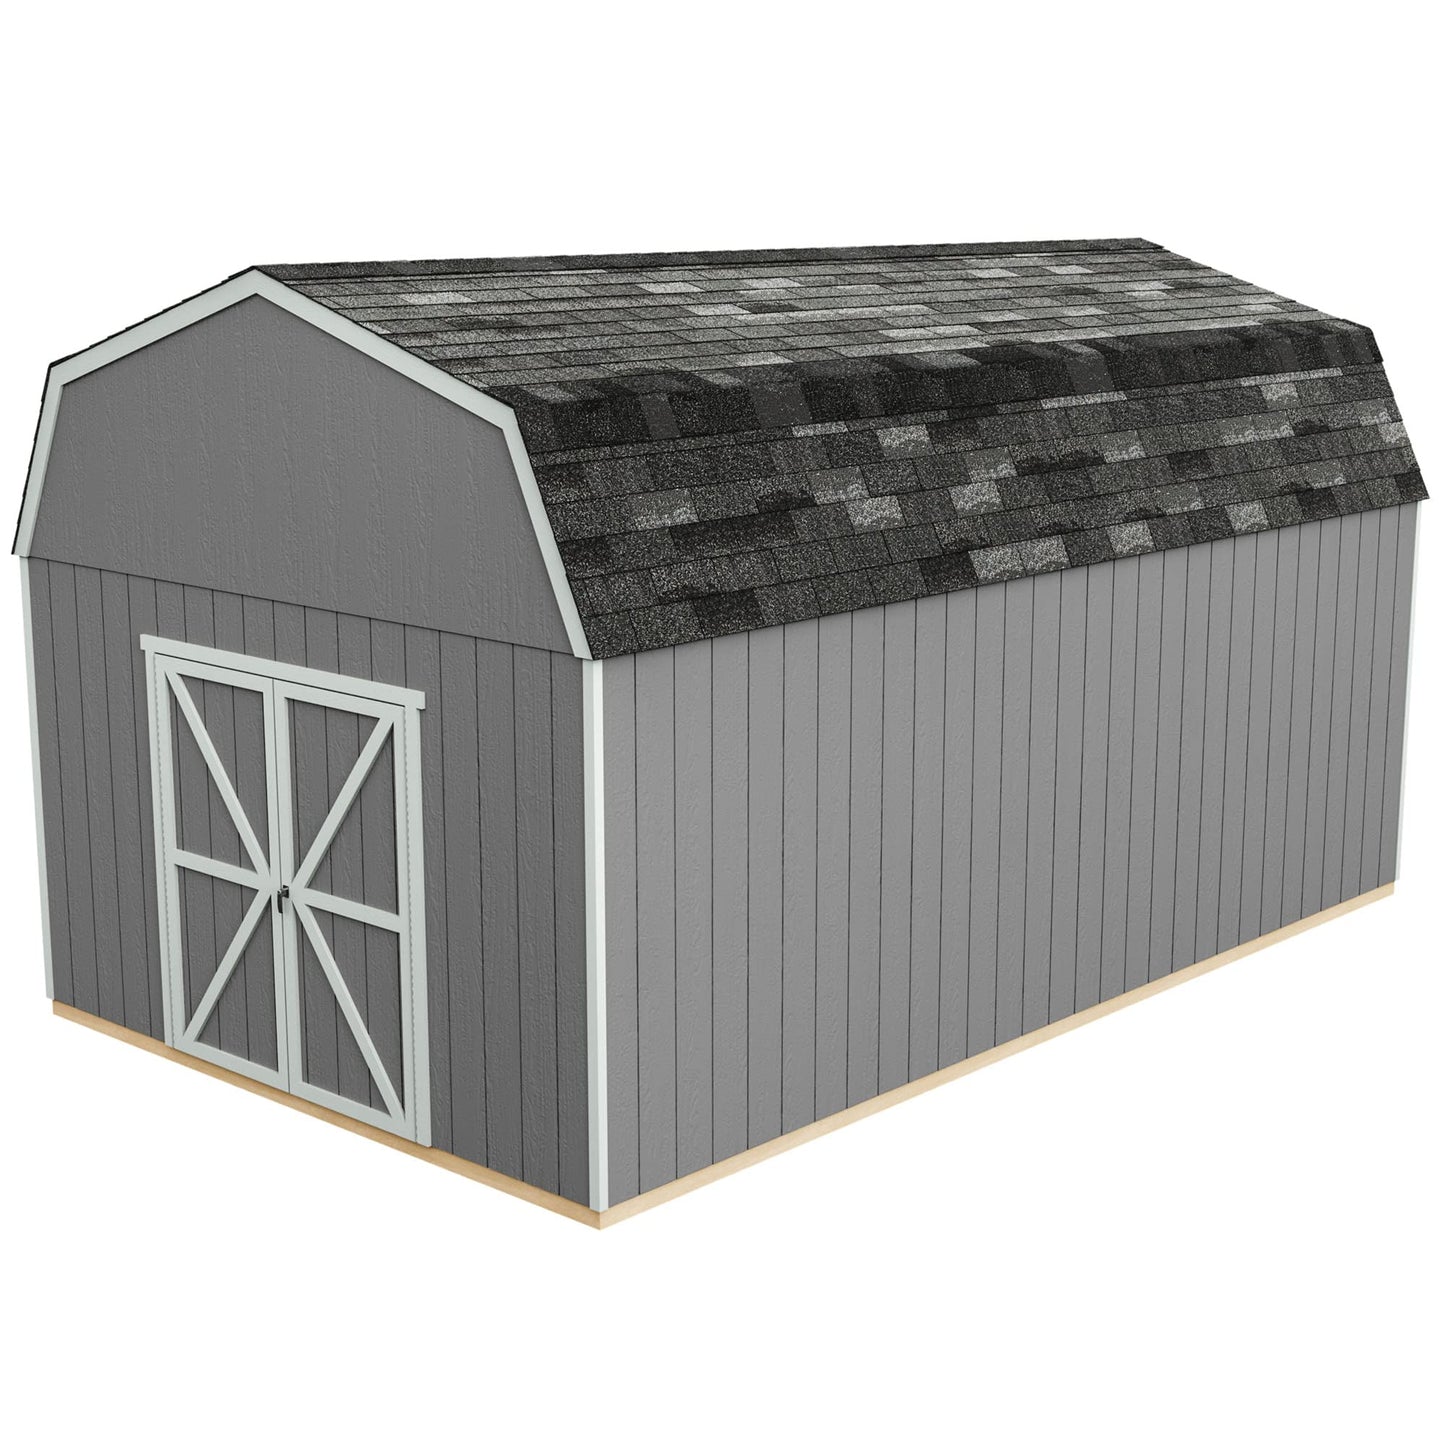 Handy Home Products Hudson 12x20 Do-it-Yourself Wooden Storage Shed Brown Without Floor